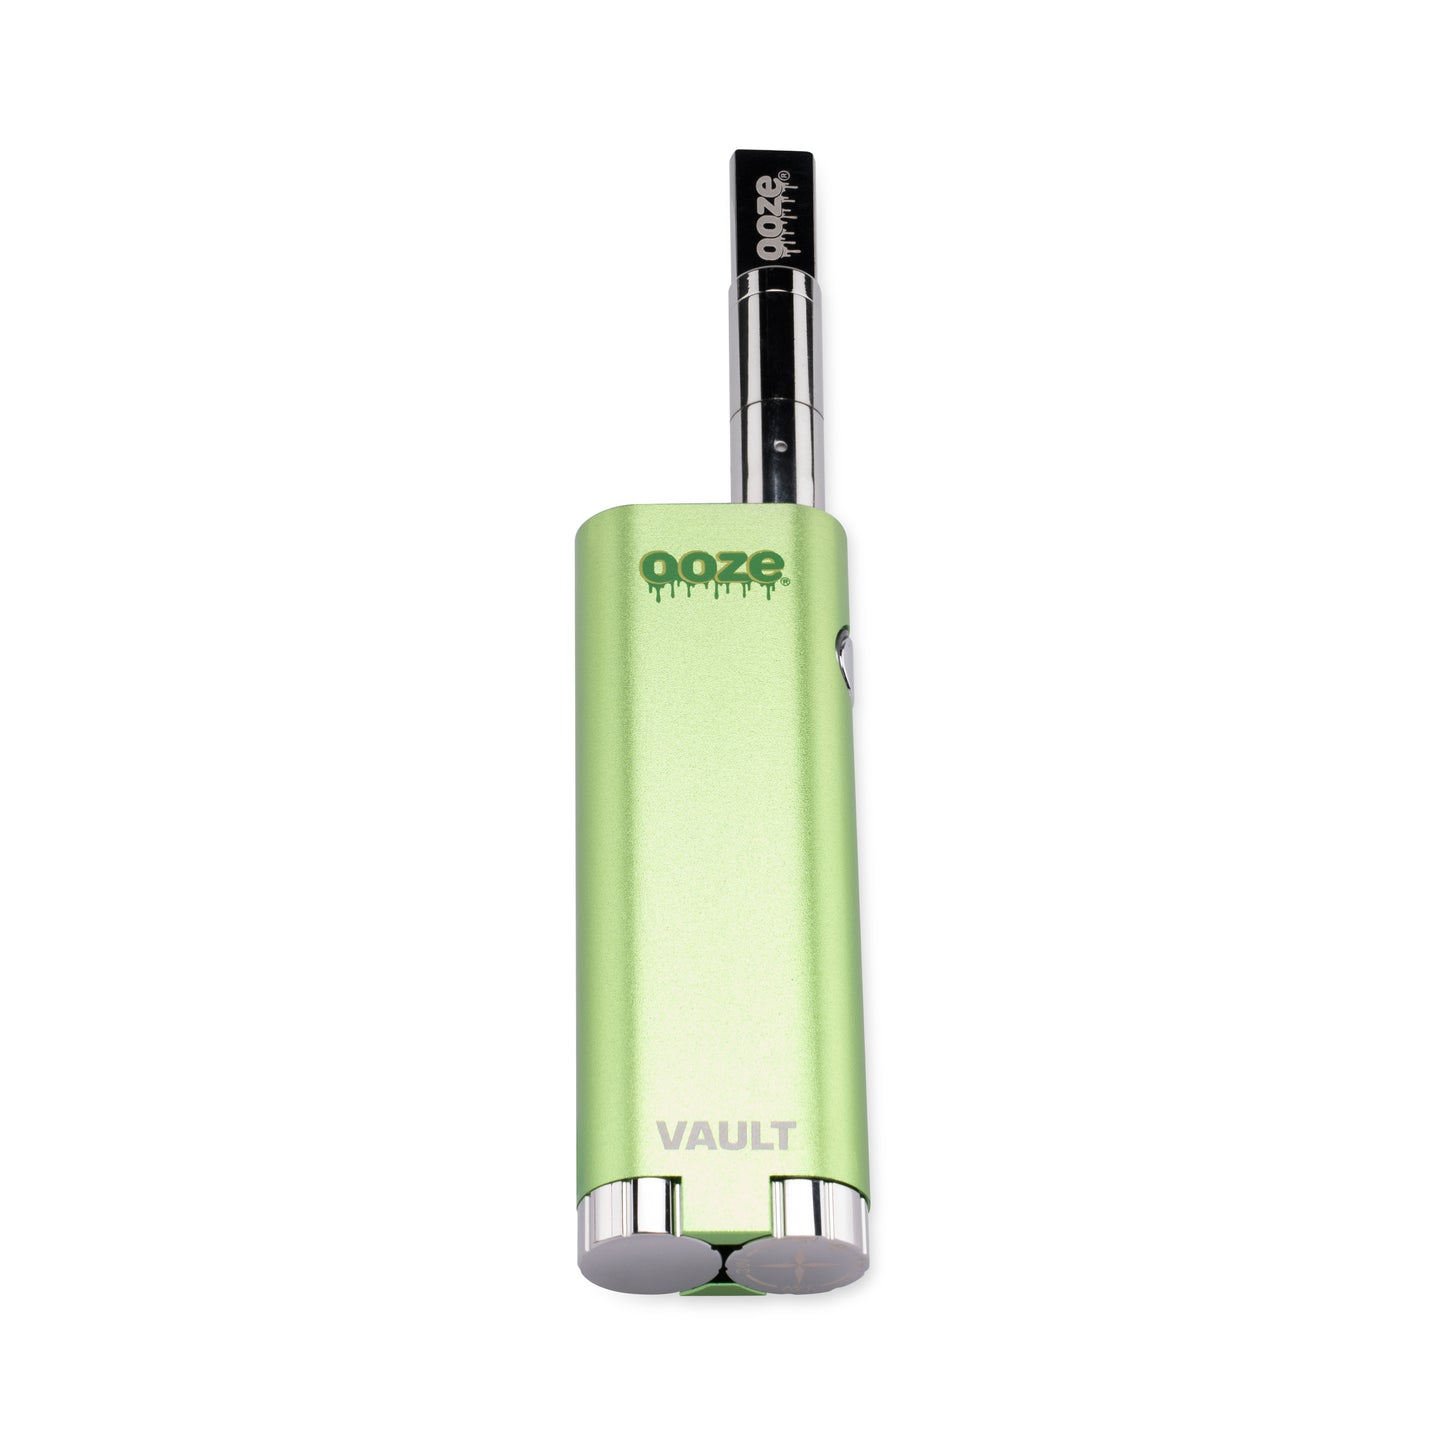 Ooze Vault 510 Thread Vape Battery With Storage Chamber - Slime Green